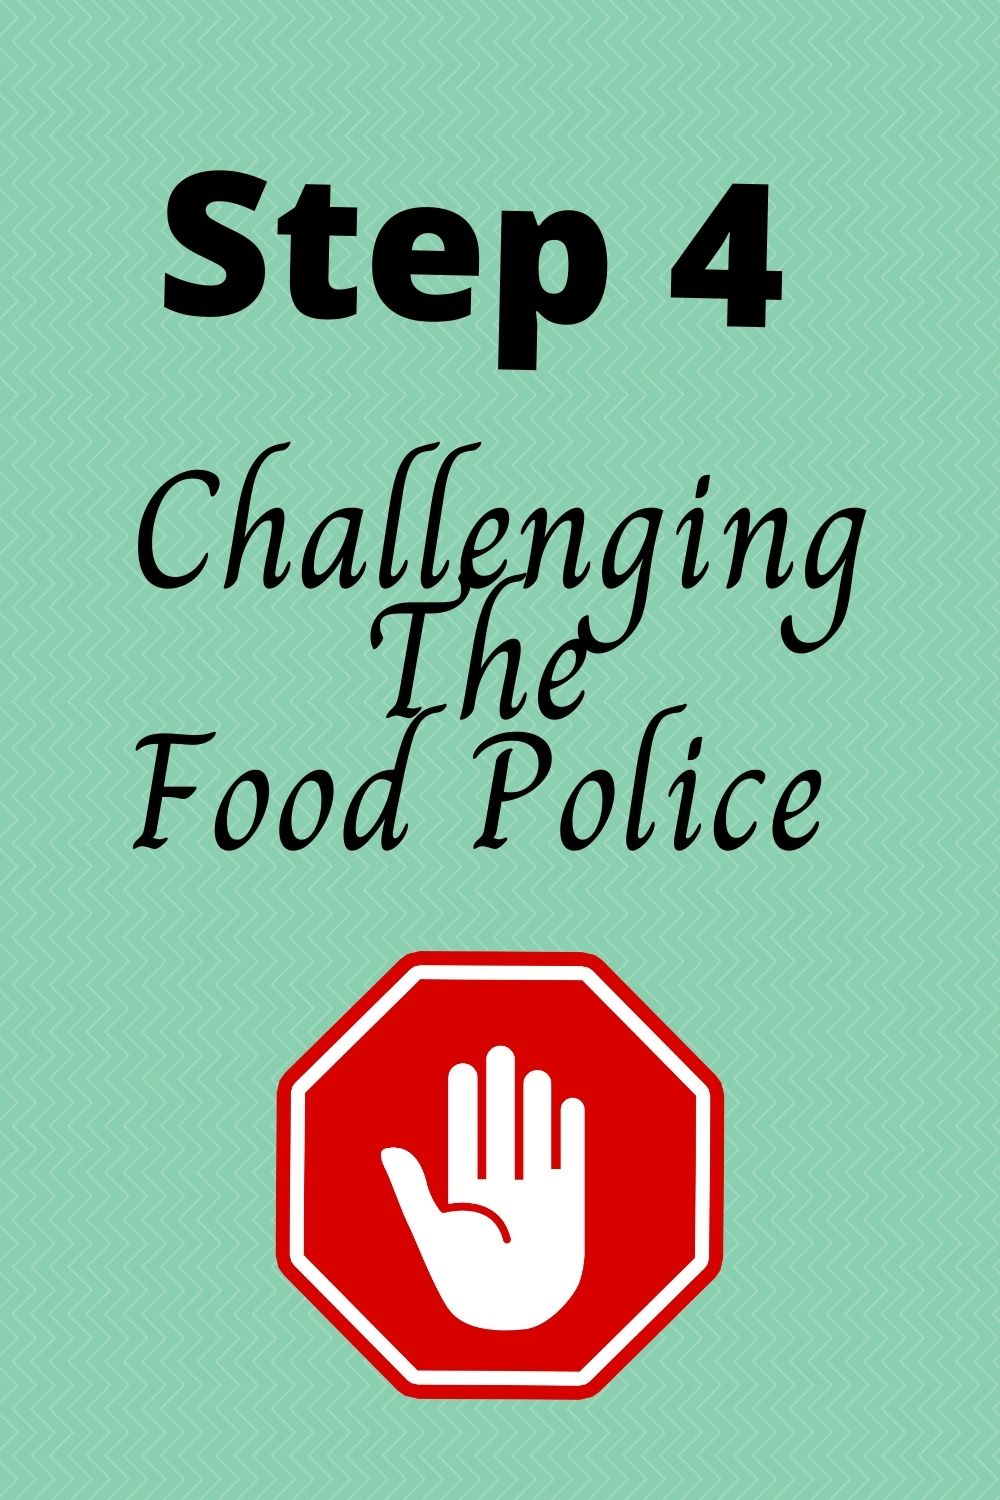 Challenging the food police